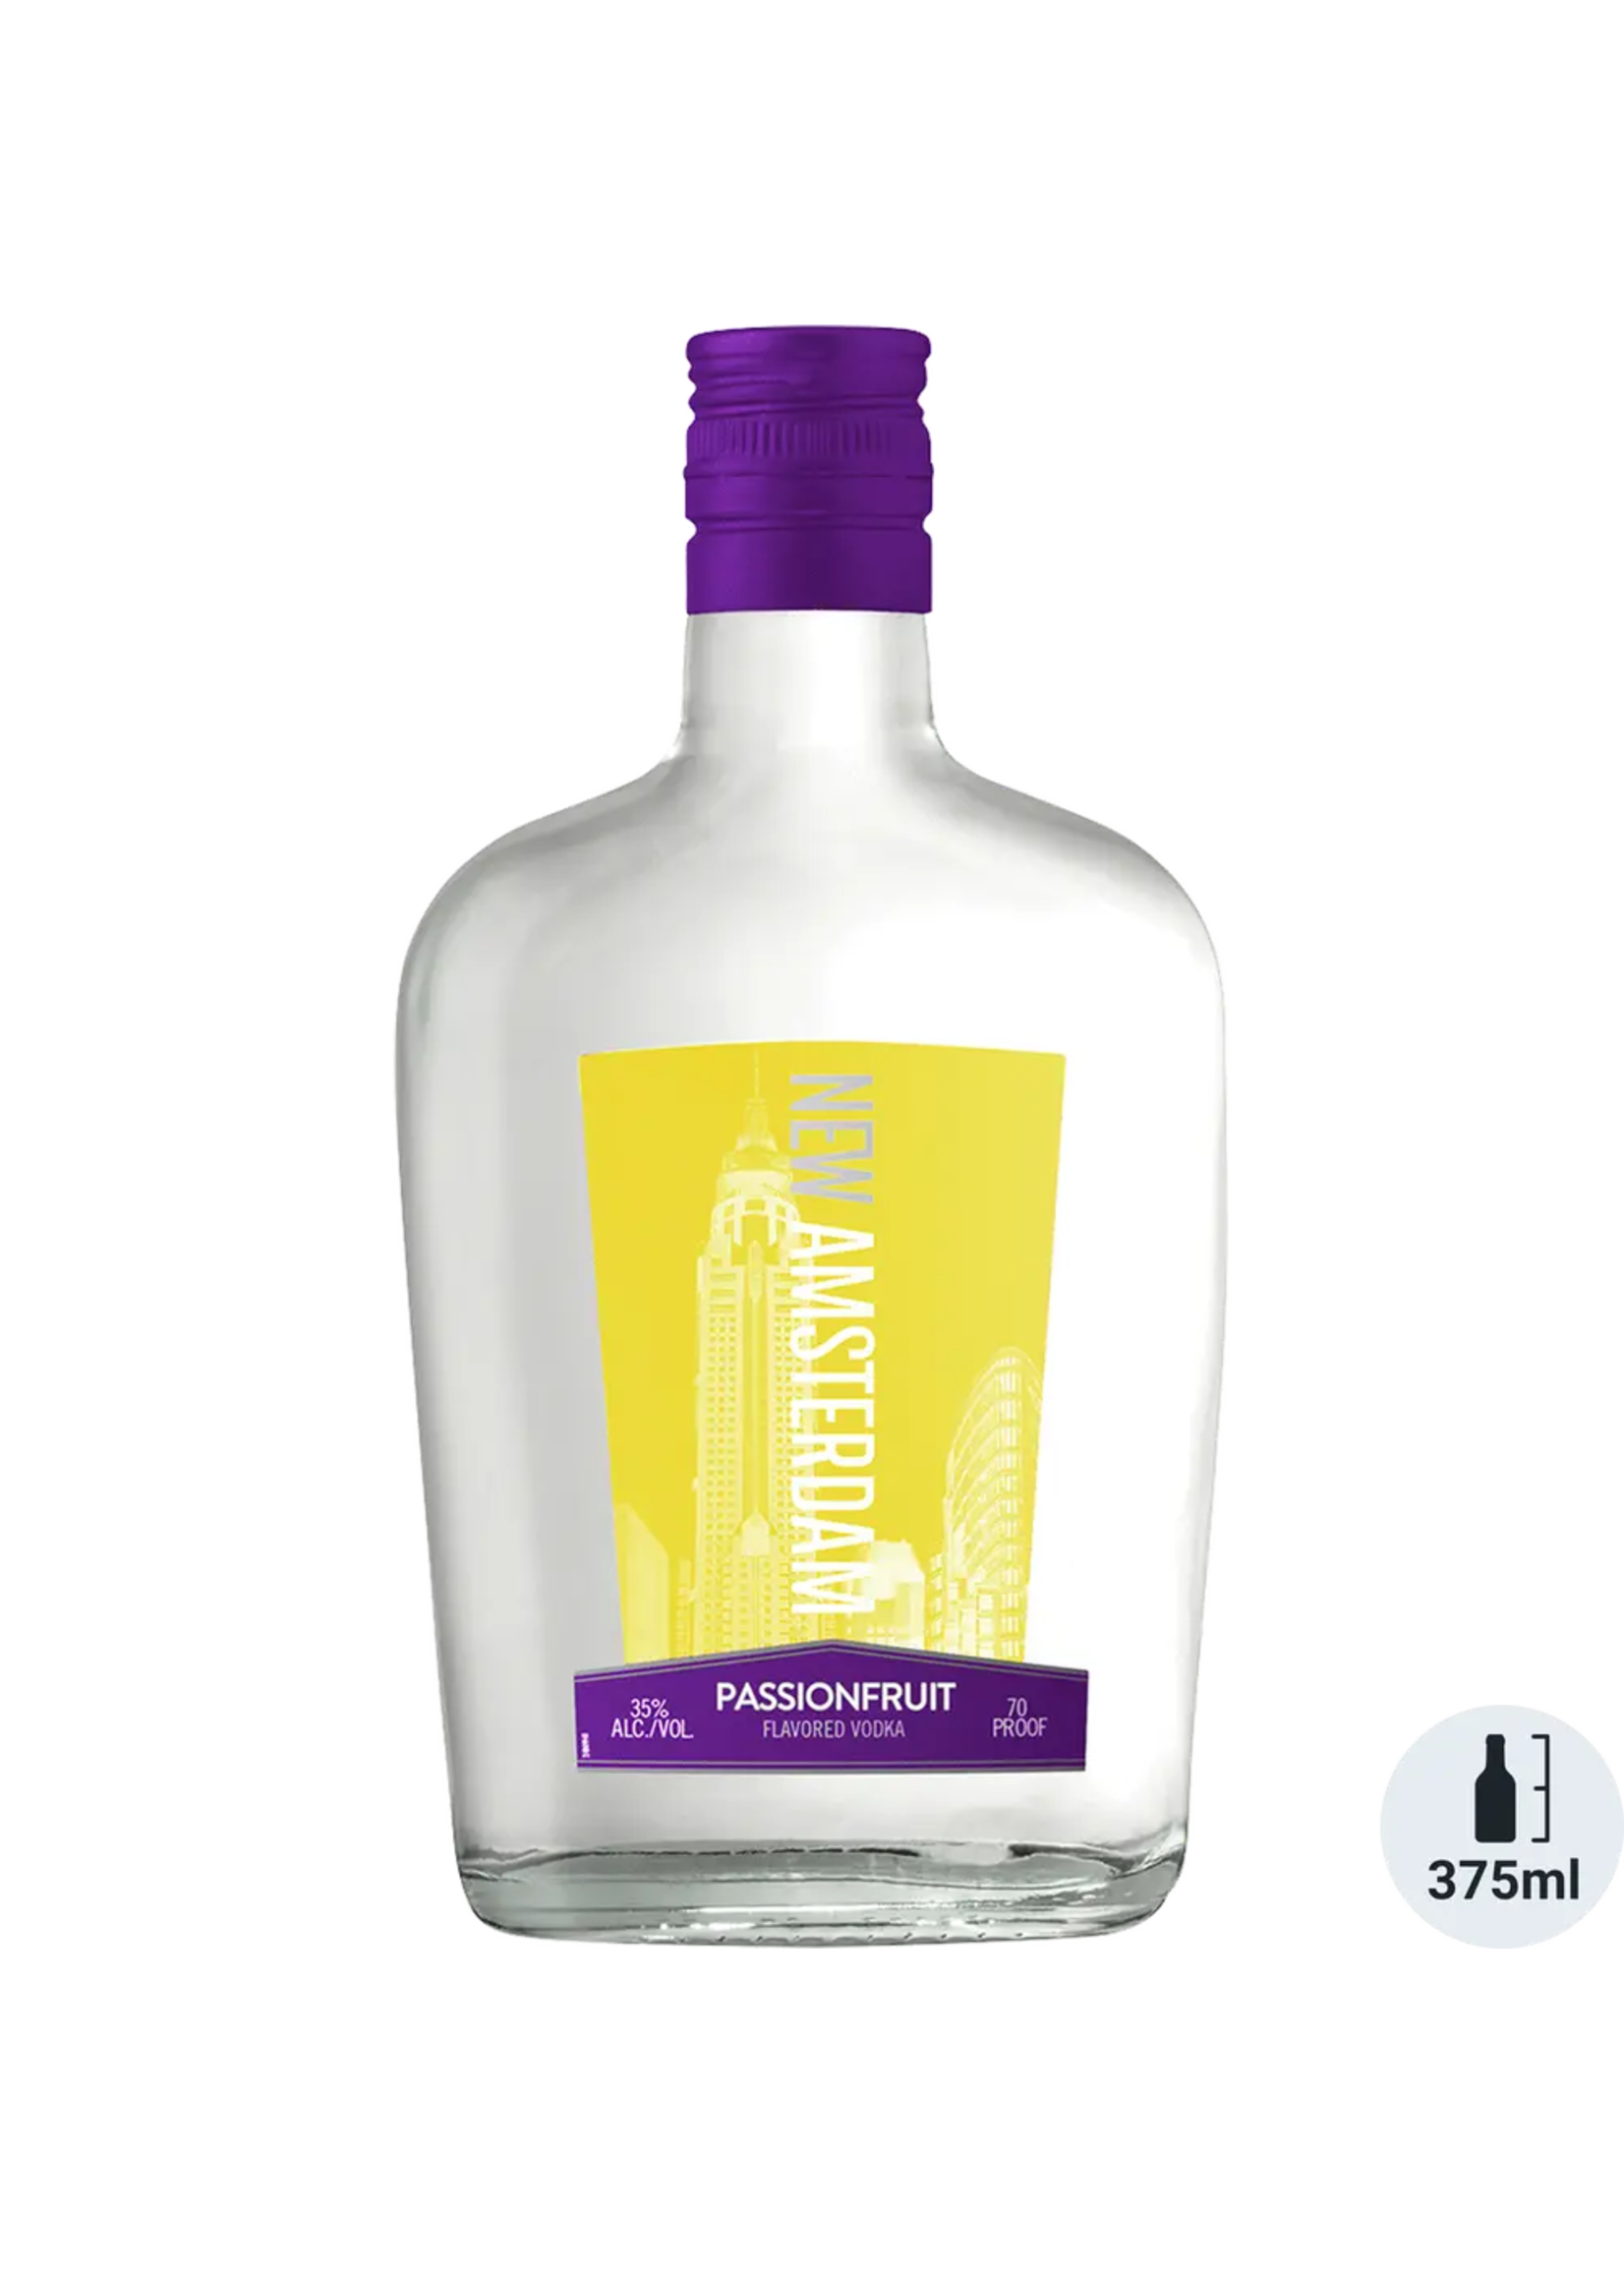 New Amsterdam Passion Fruit Flavored Vodka 70Proof 375ml